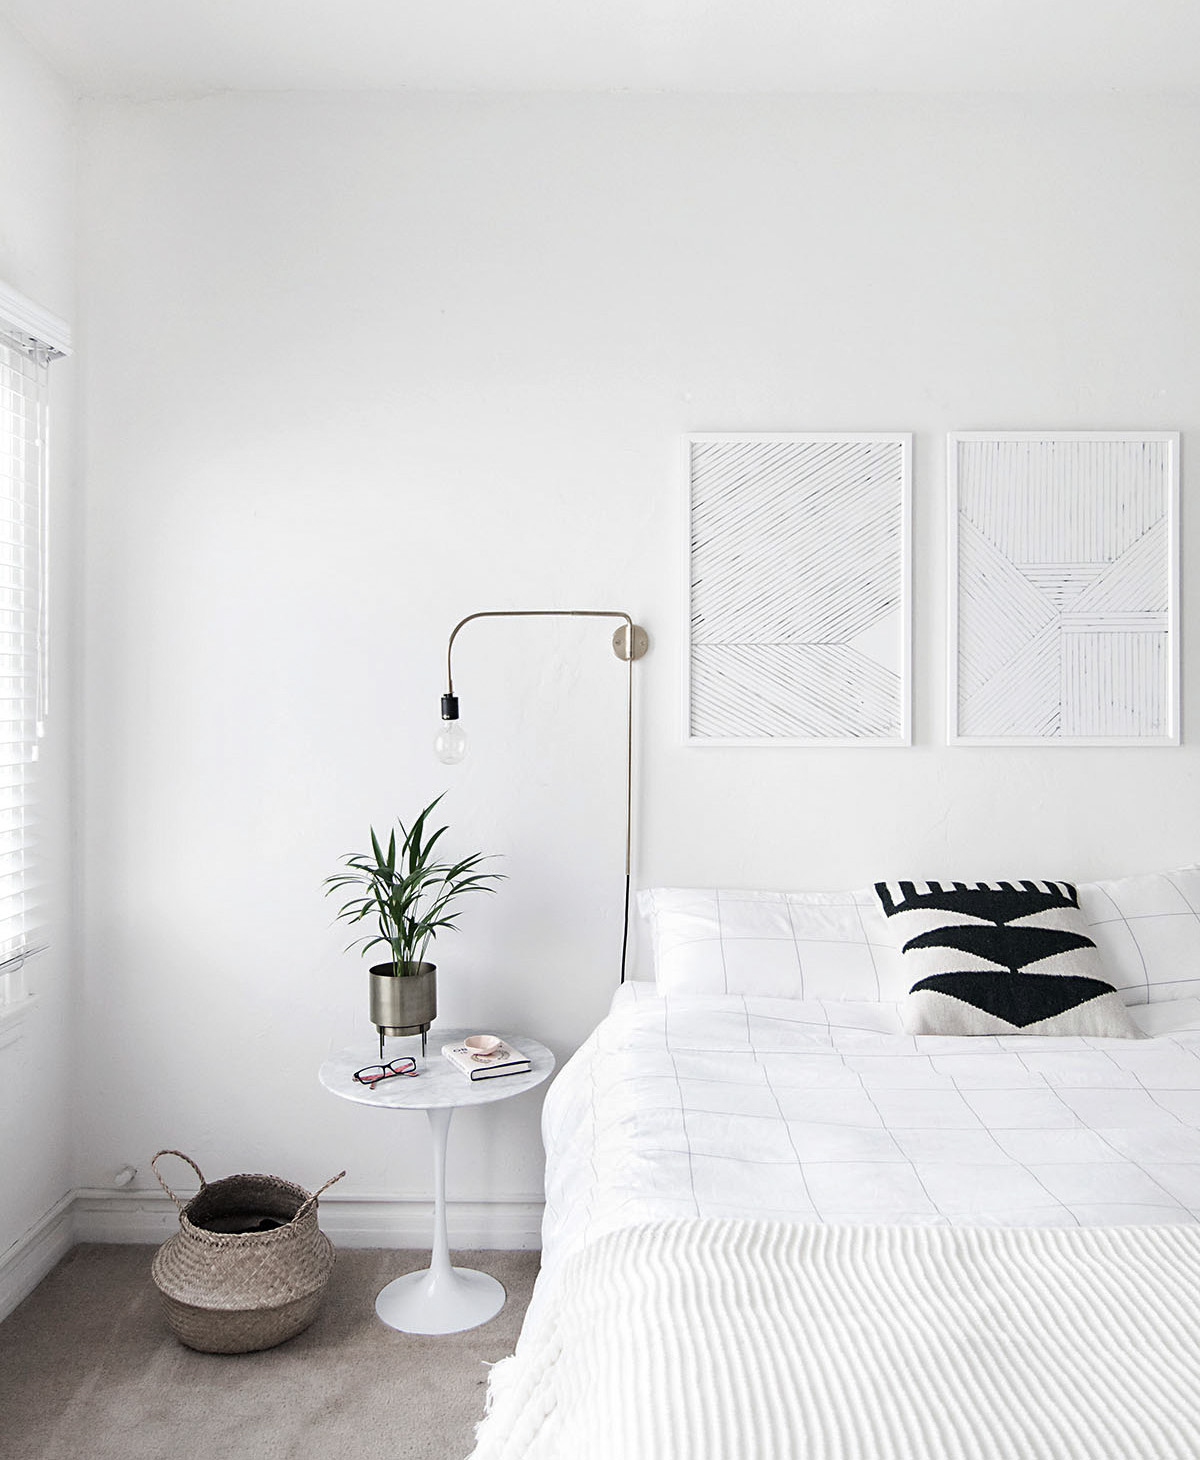 Simple side table for minimalist vibes (from Homey Oh My)